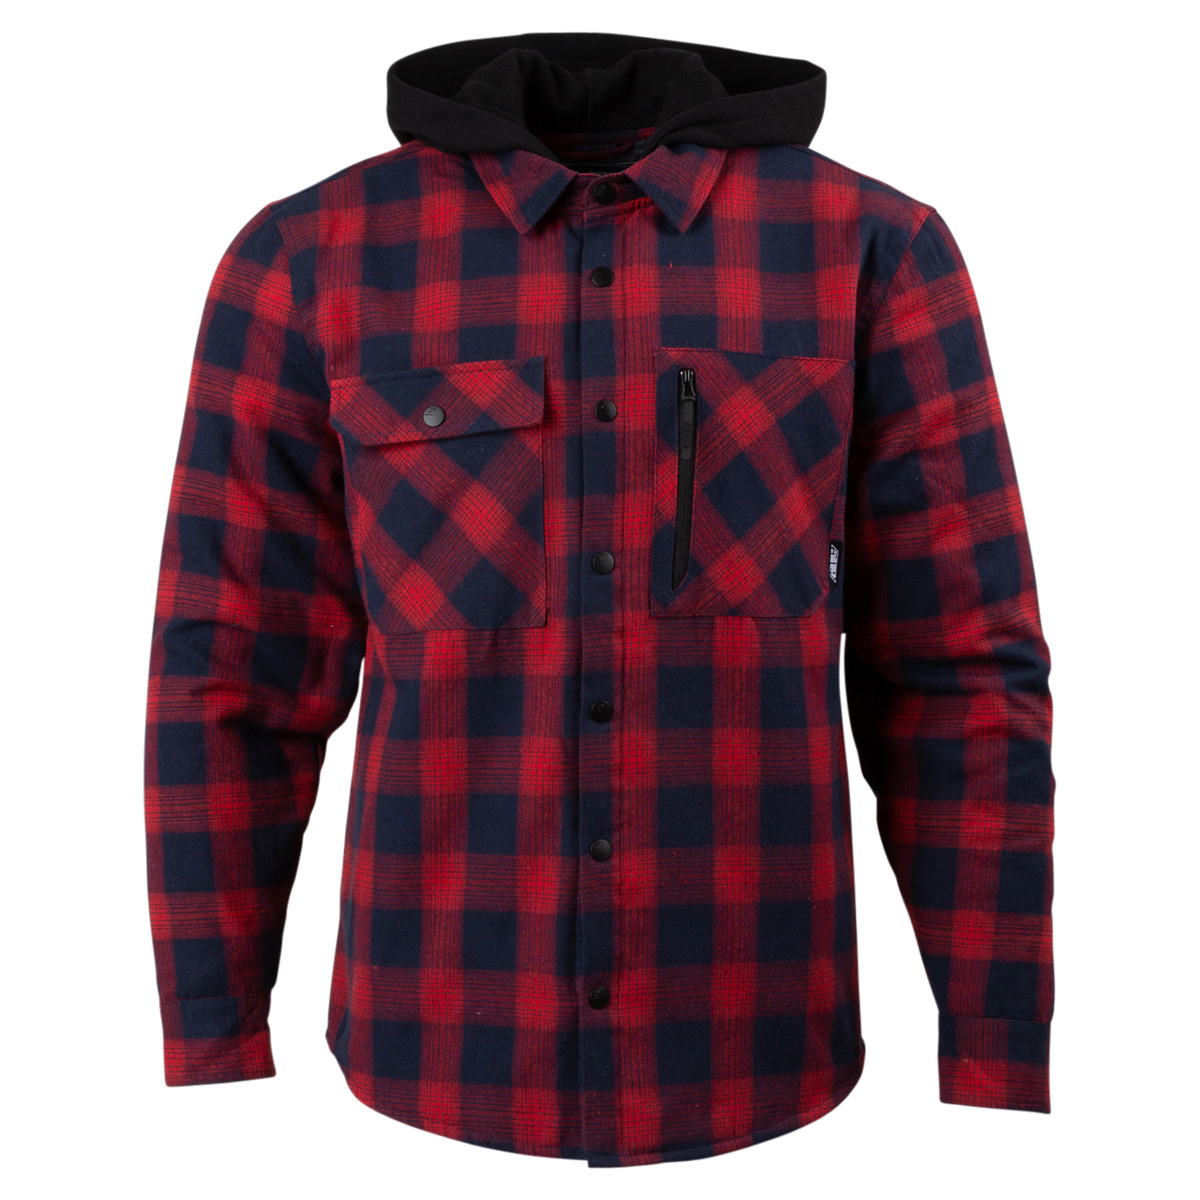   tech flannel black and grey